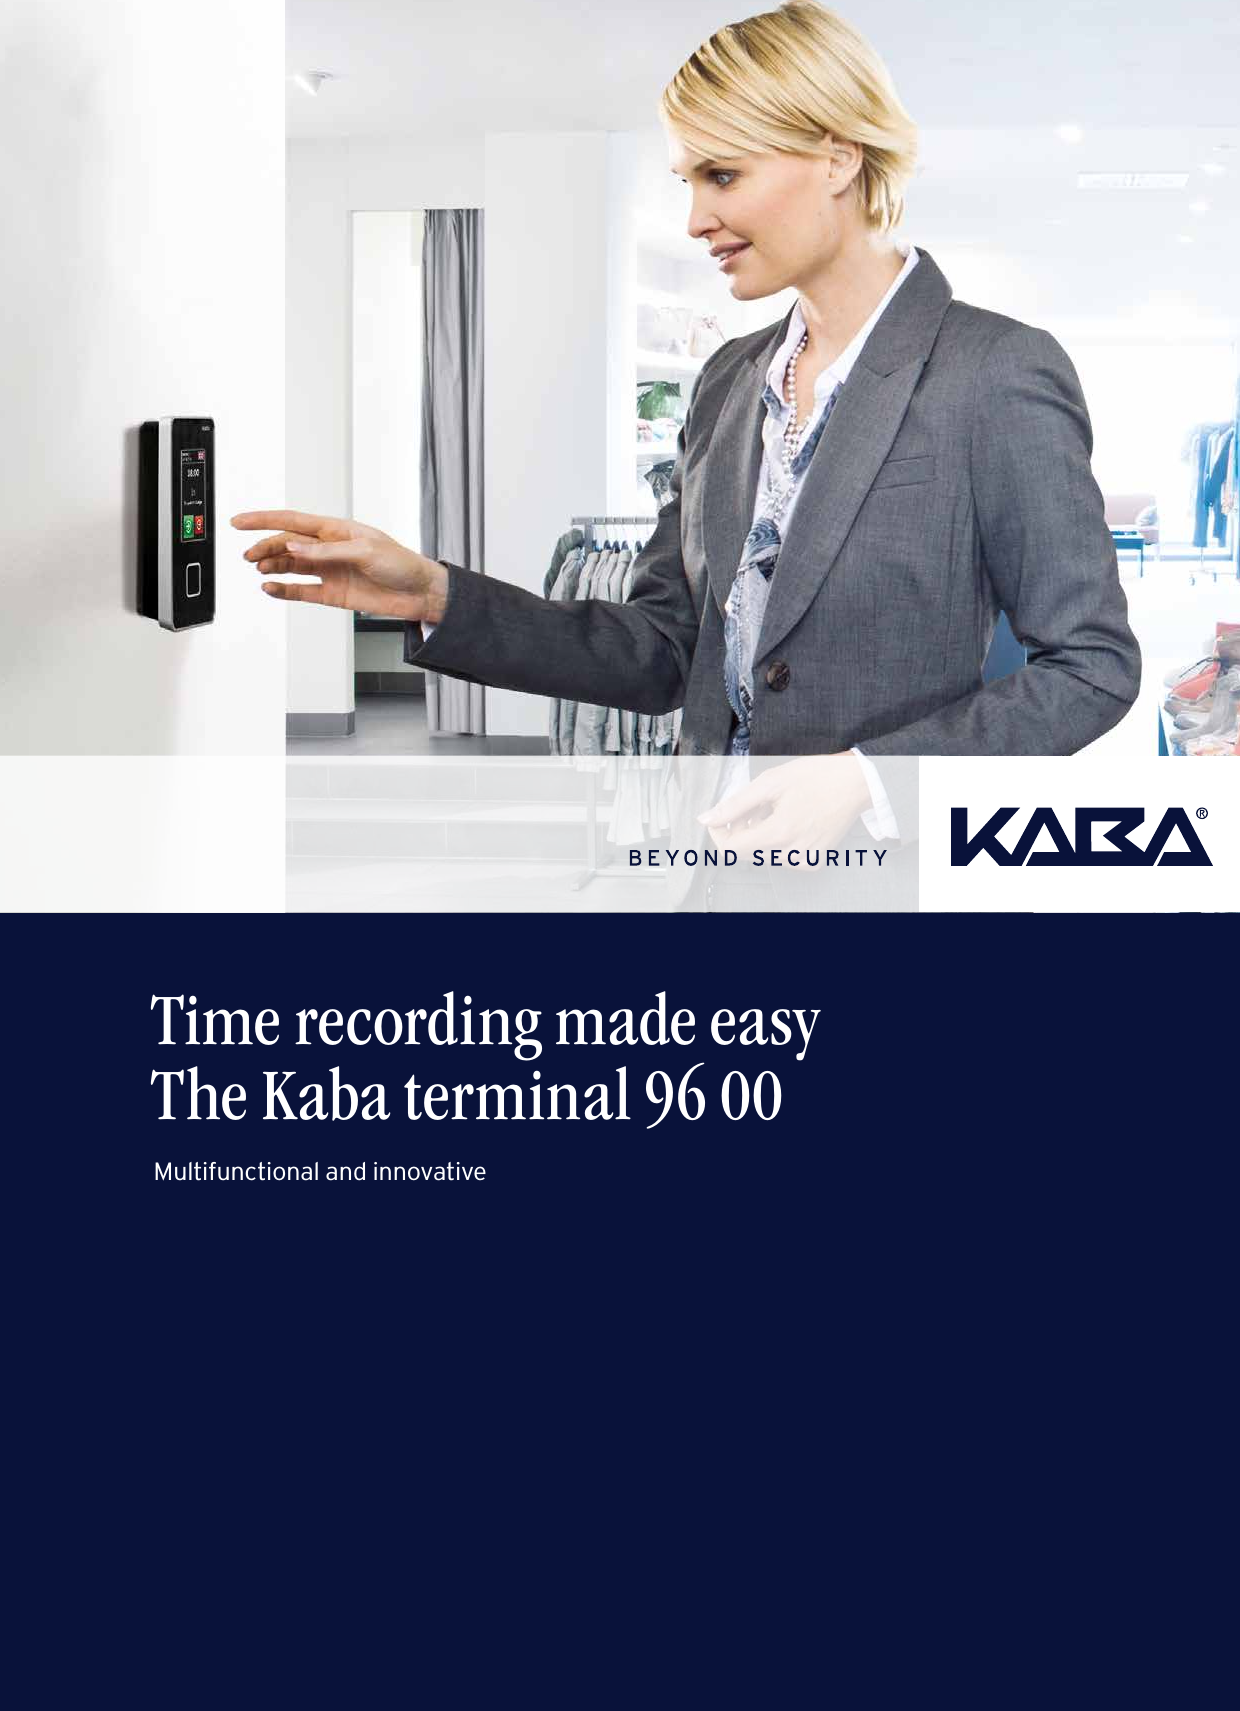 Time recording made easy The Kaba terminal 96 00Multifunctional and innovative